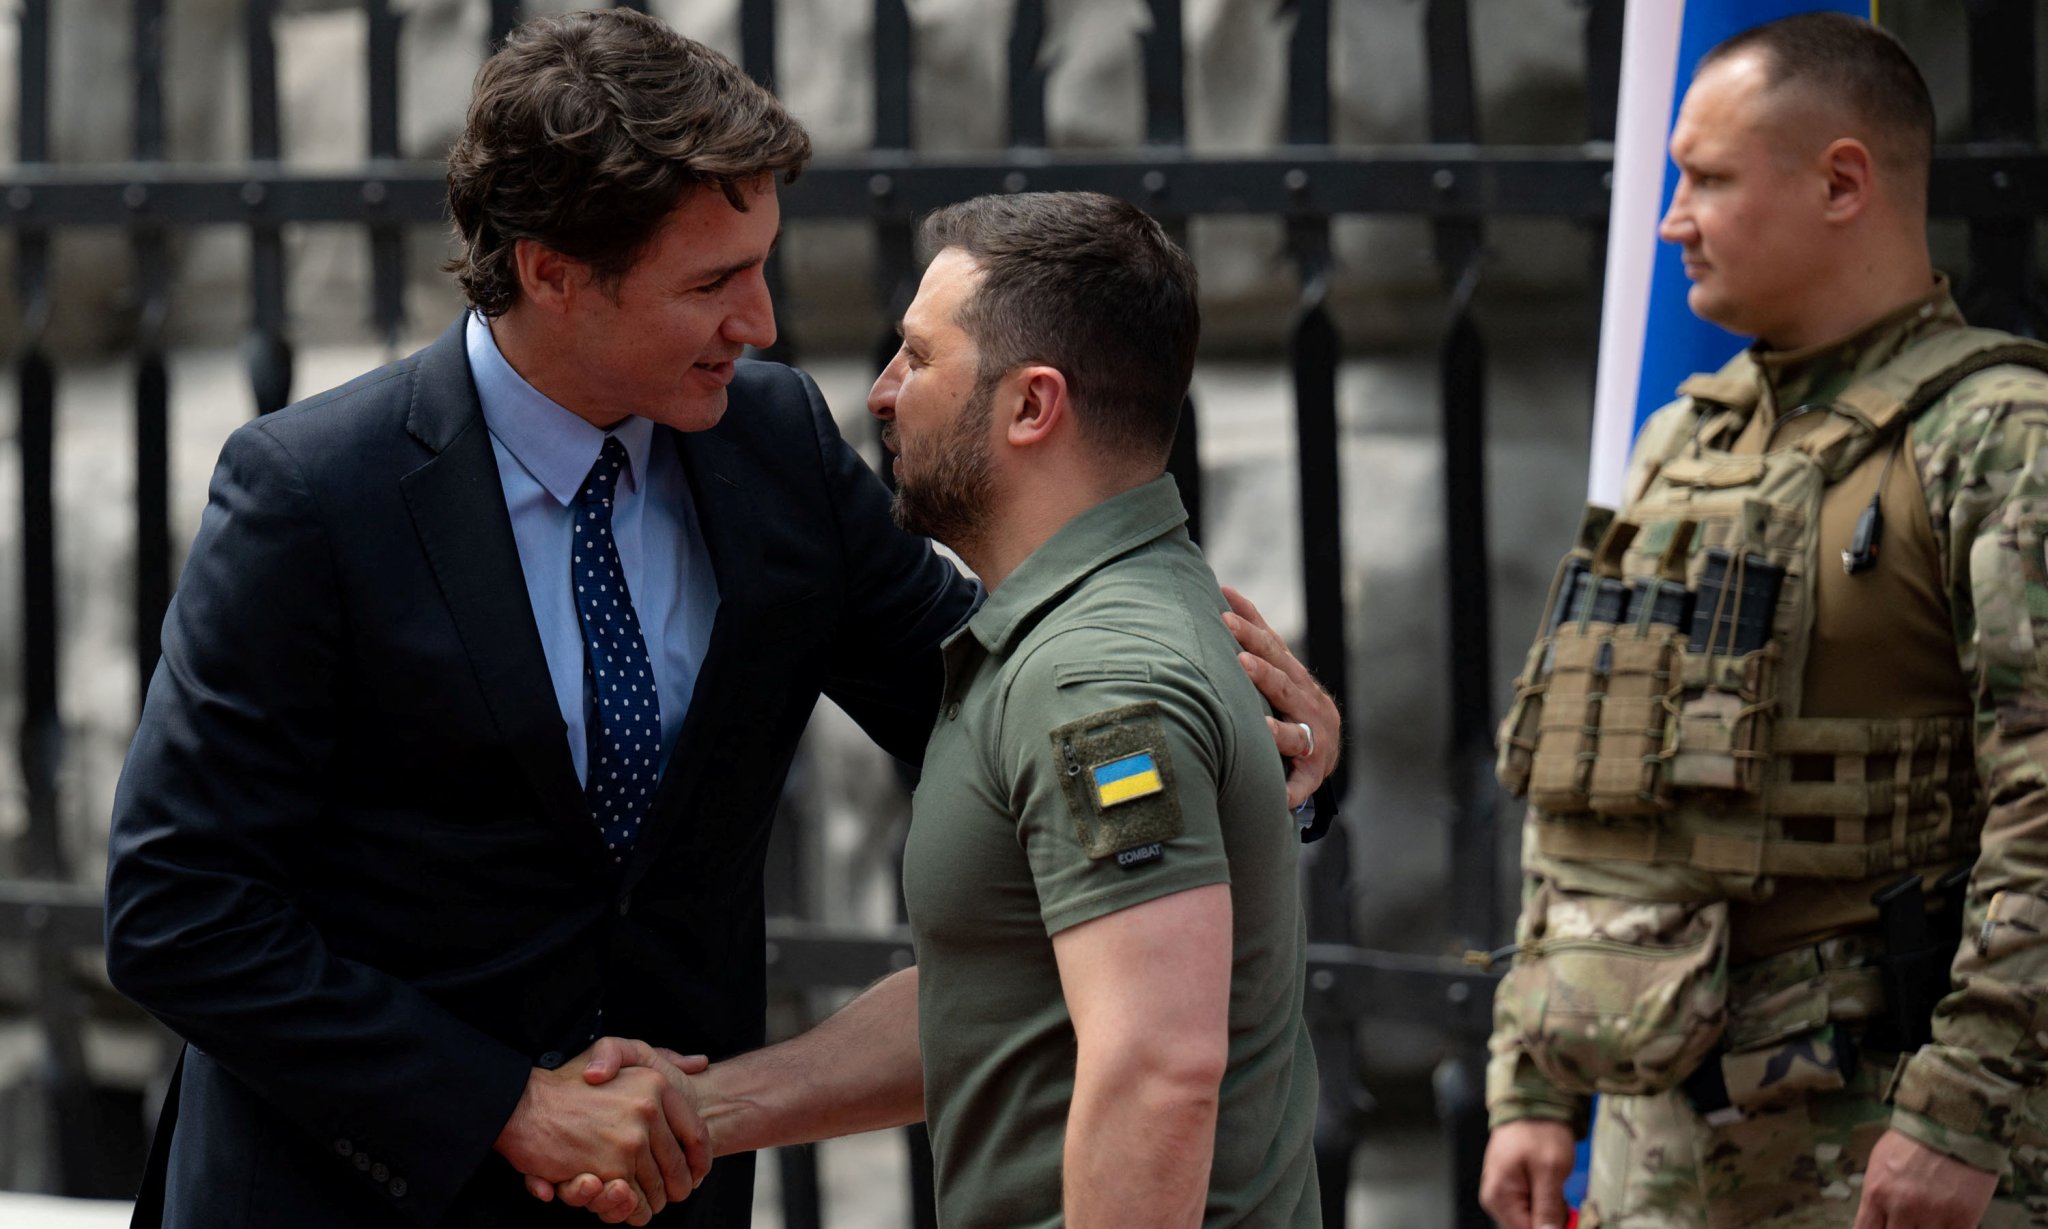 Zelenskiy appears to confirm Ukraine counteroffensive during Trudeau visit